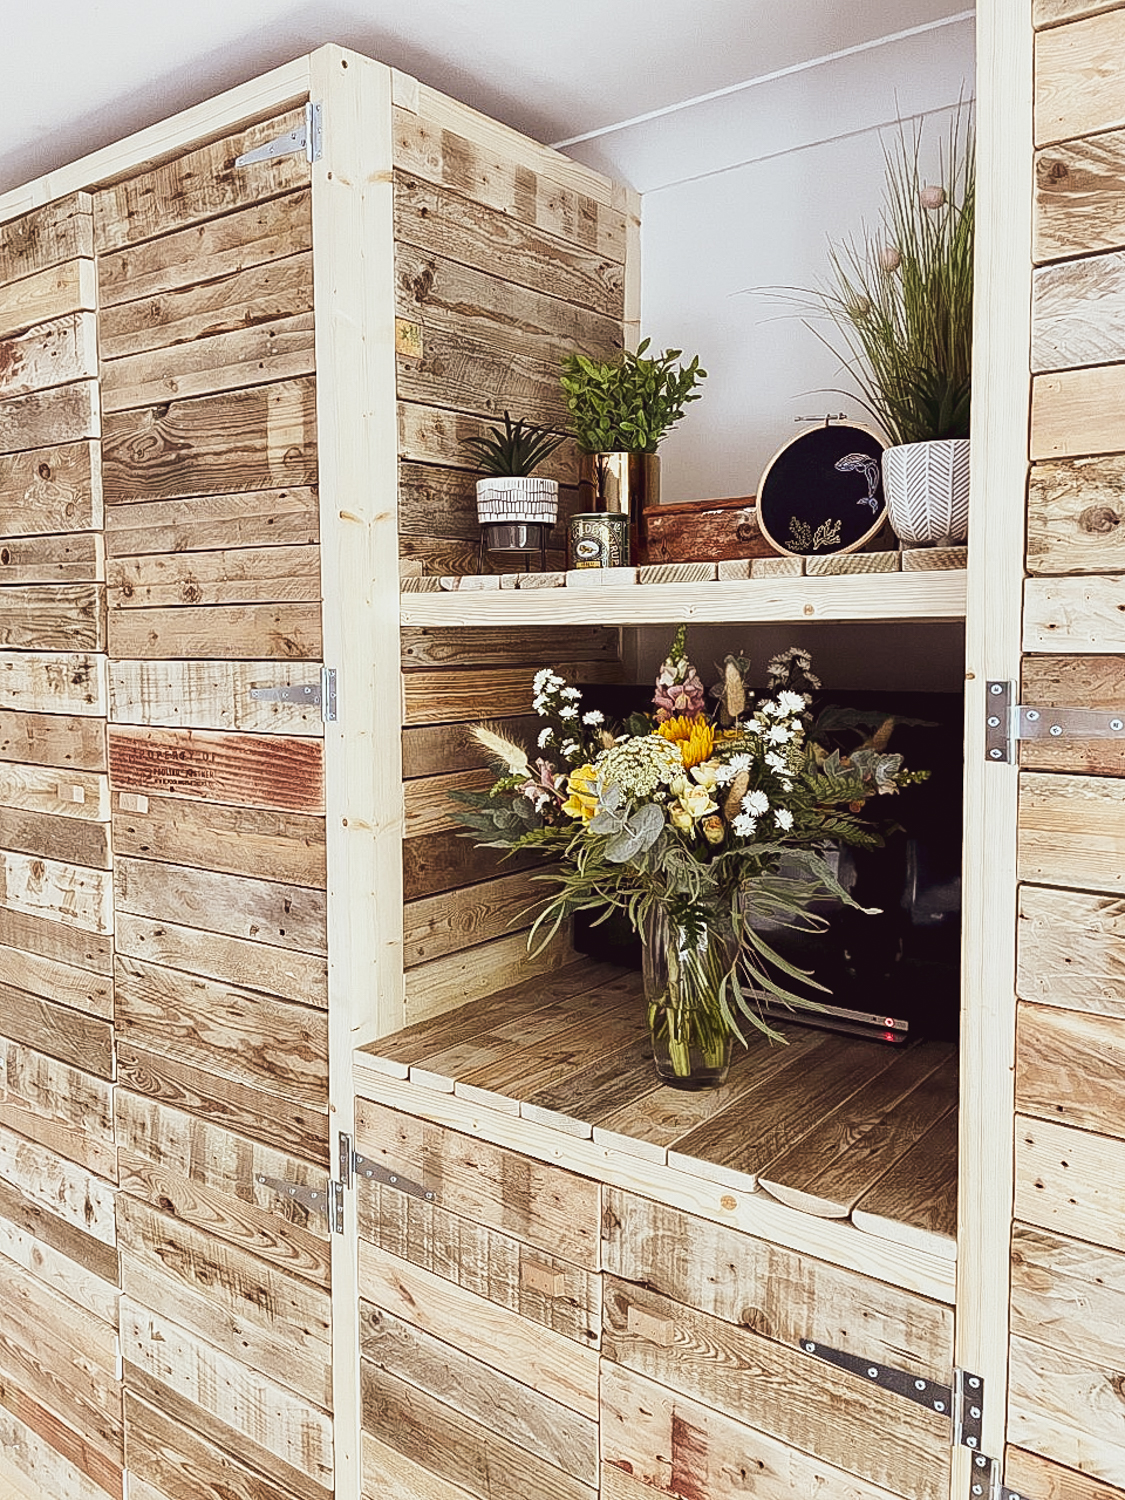 Learn how to make your own DIY pallet wardrobe/closet with step by step instructions